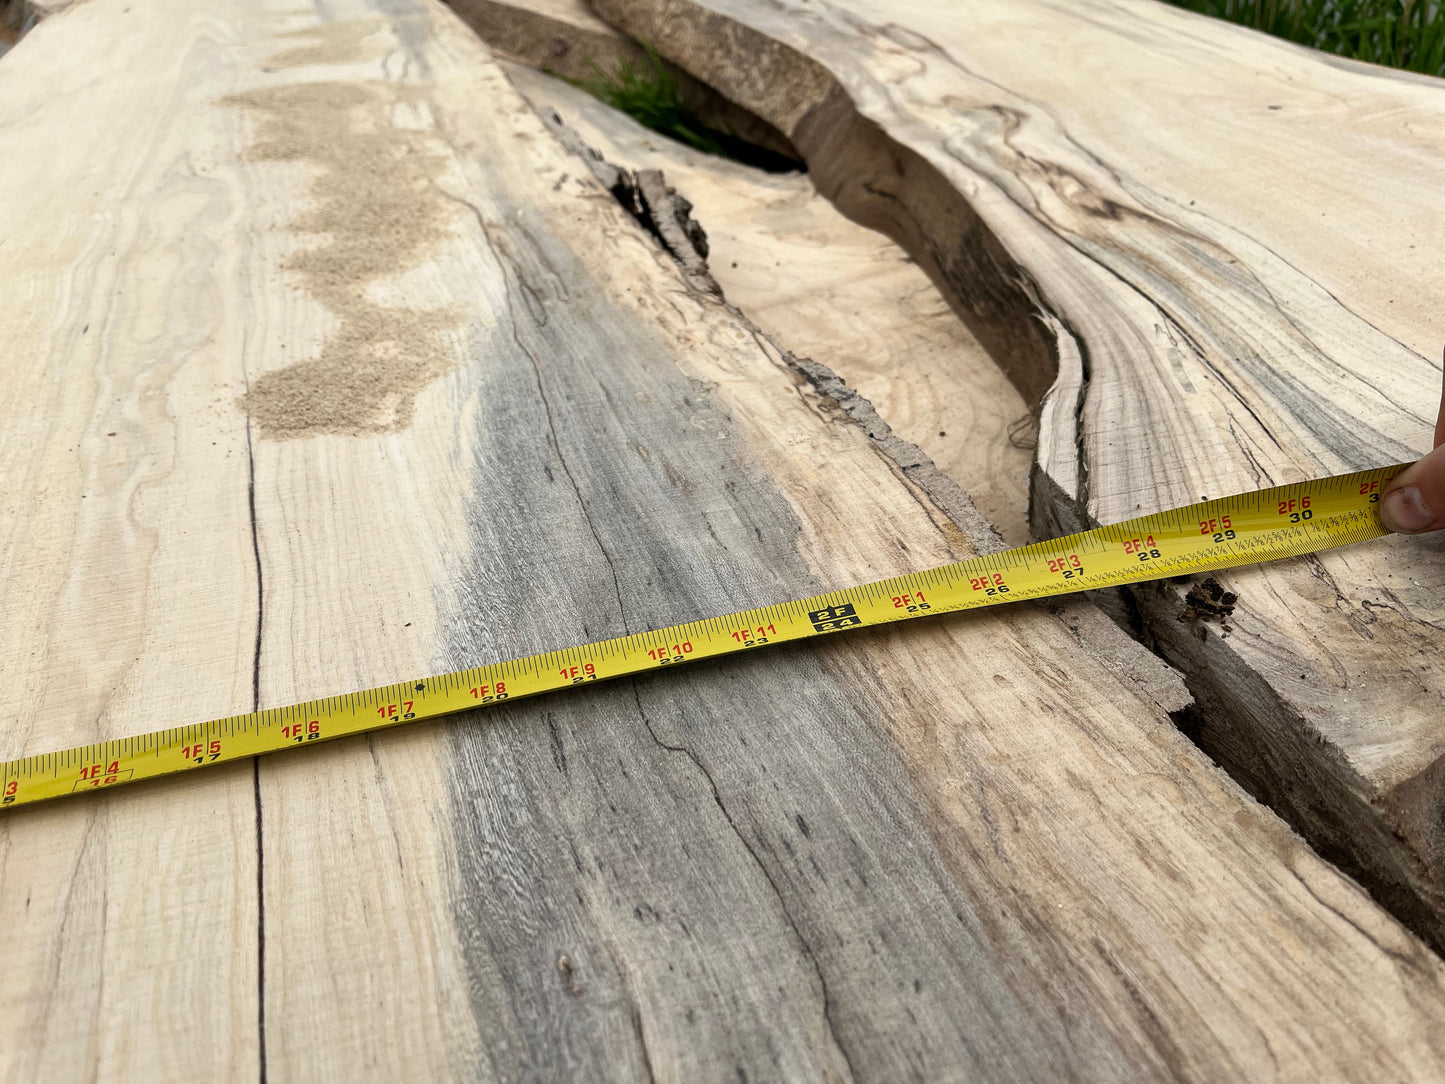 1" Thick Planed Pecan Live Edge Slabs for Charcuterie Boards, Furniture, Tables and Bar Tops, Shelves, and More - Kiln Dried